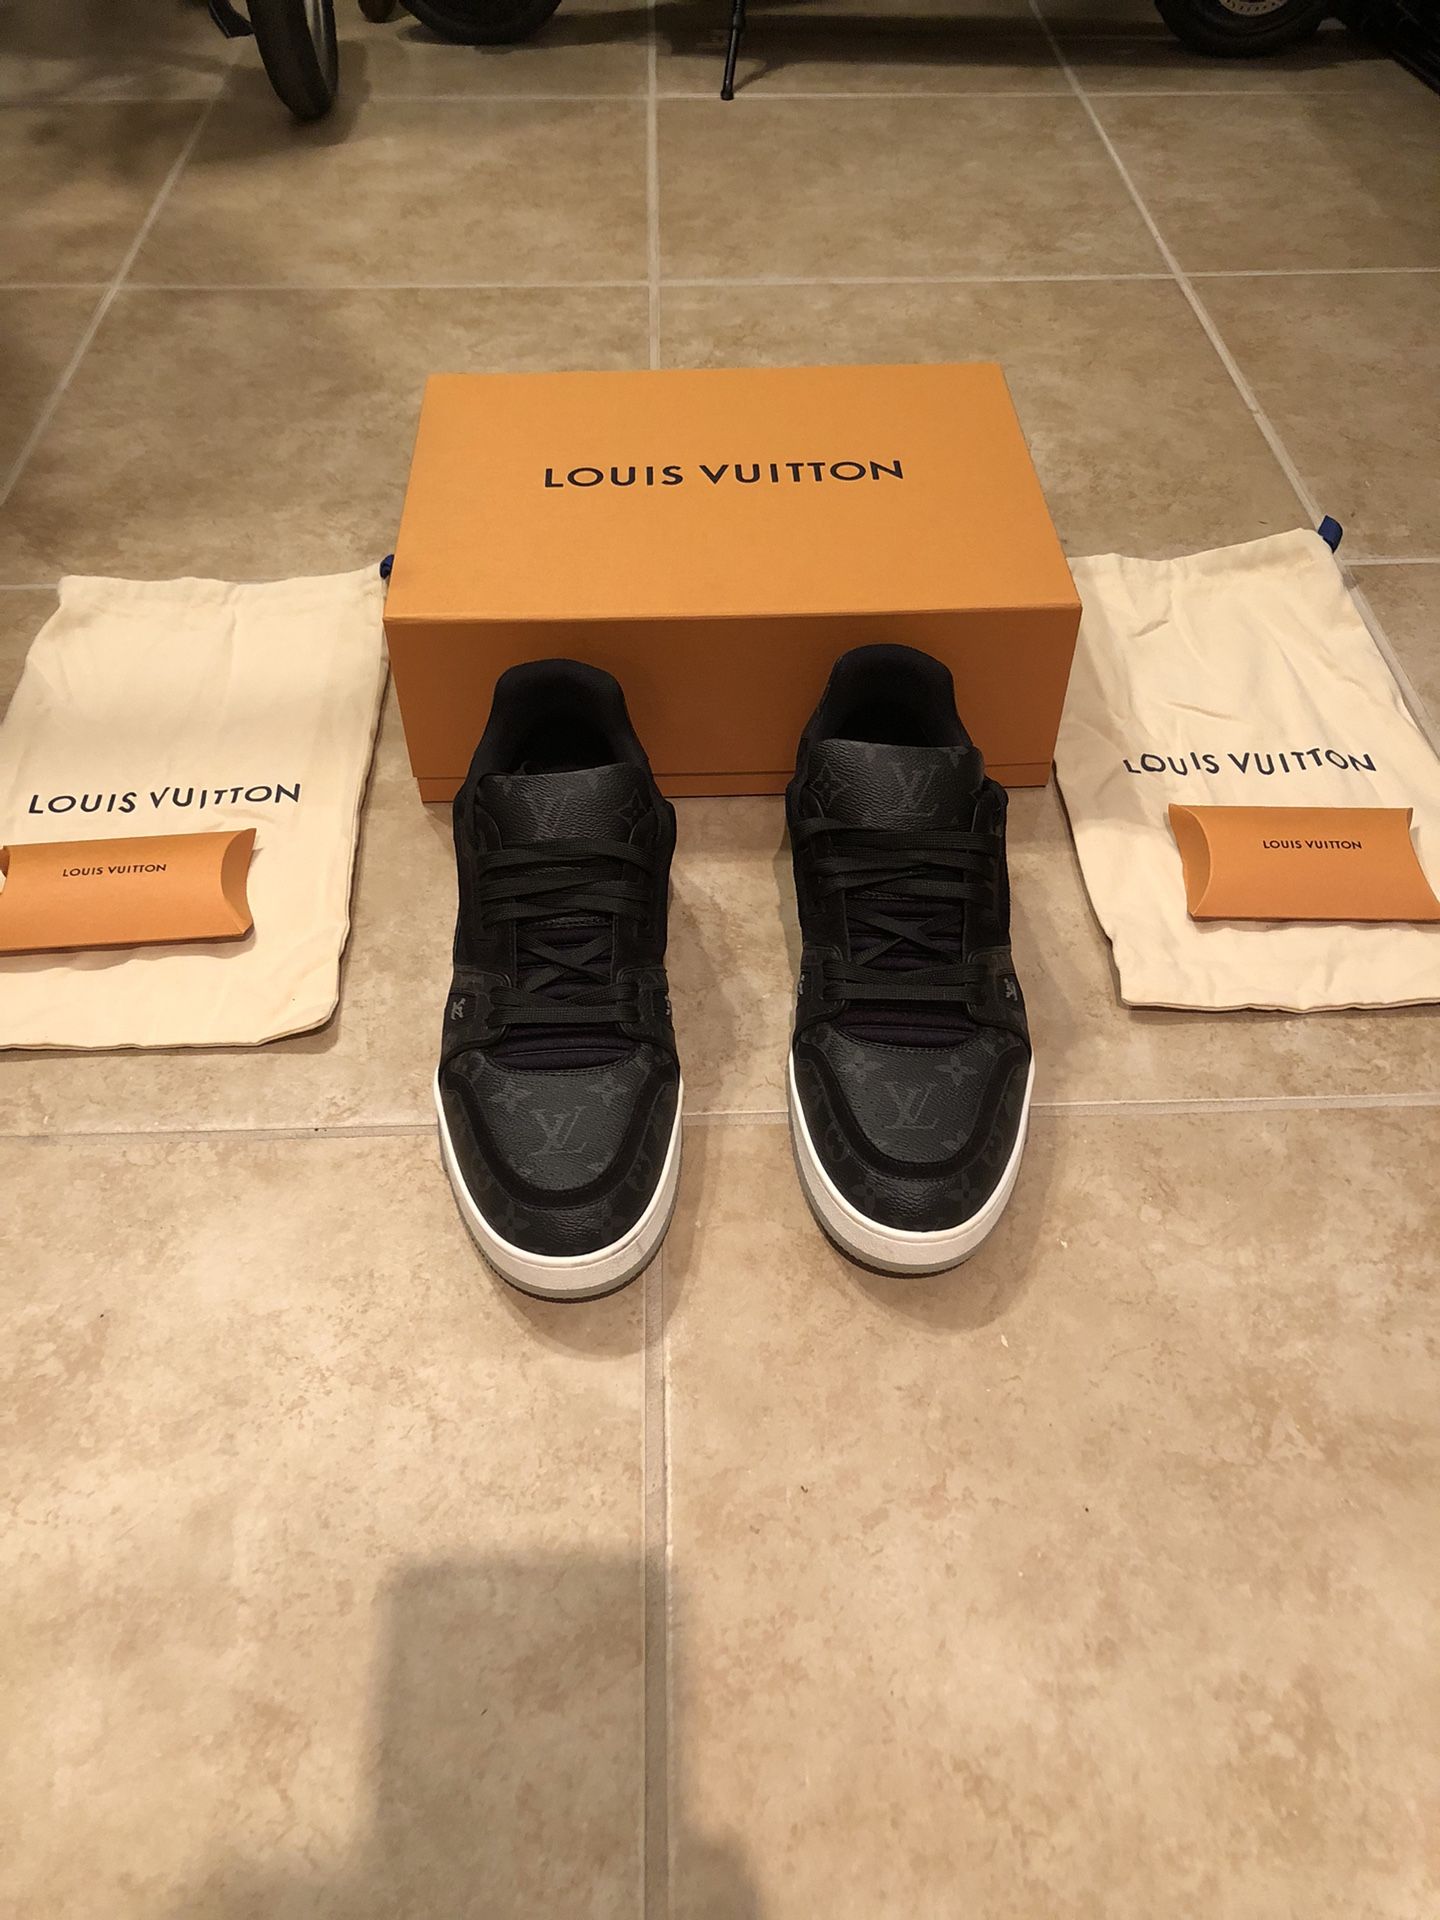 Authentic Louis Vuitton Shoes/Slides for Sale in Henderson, NV - OfferUp